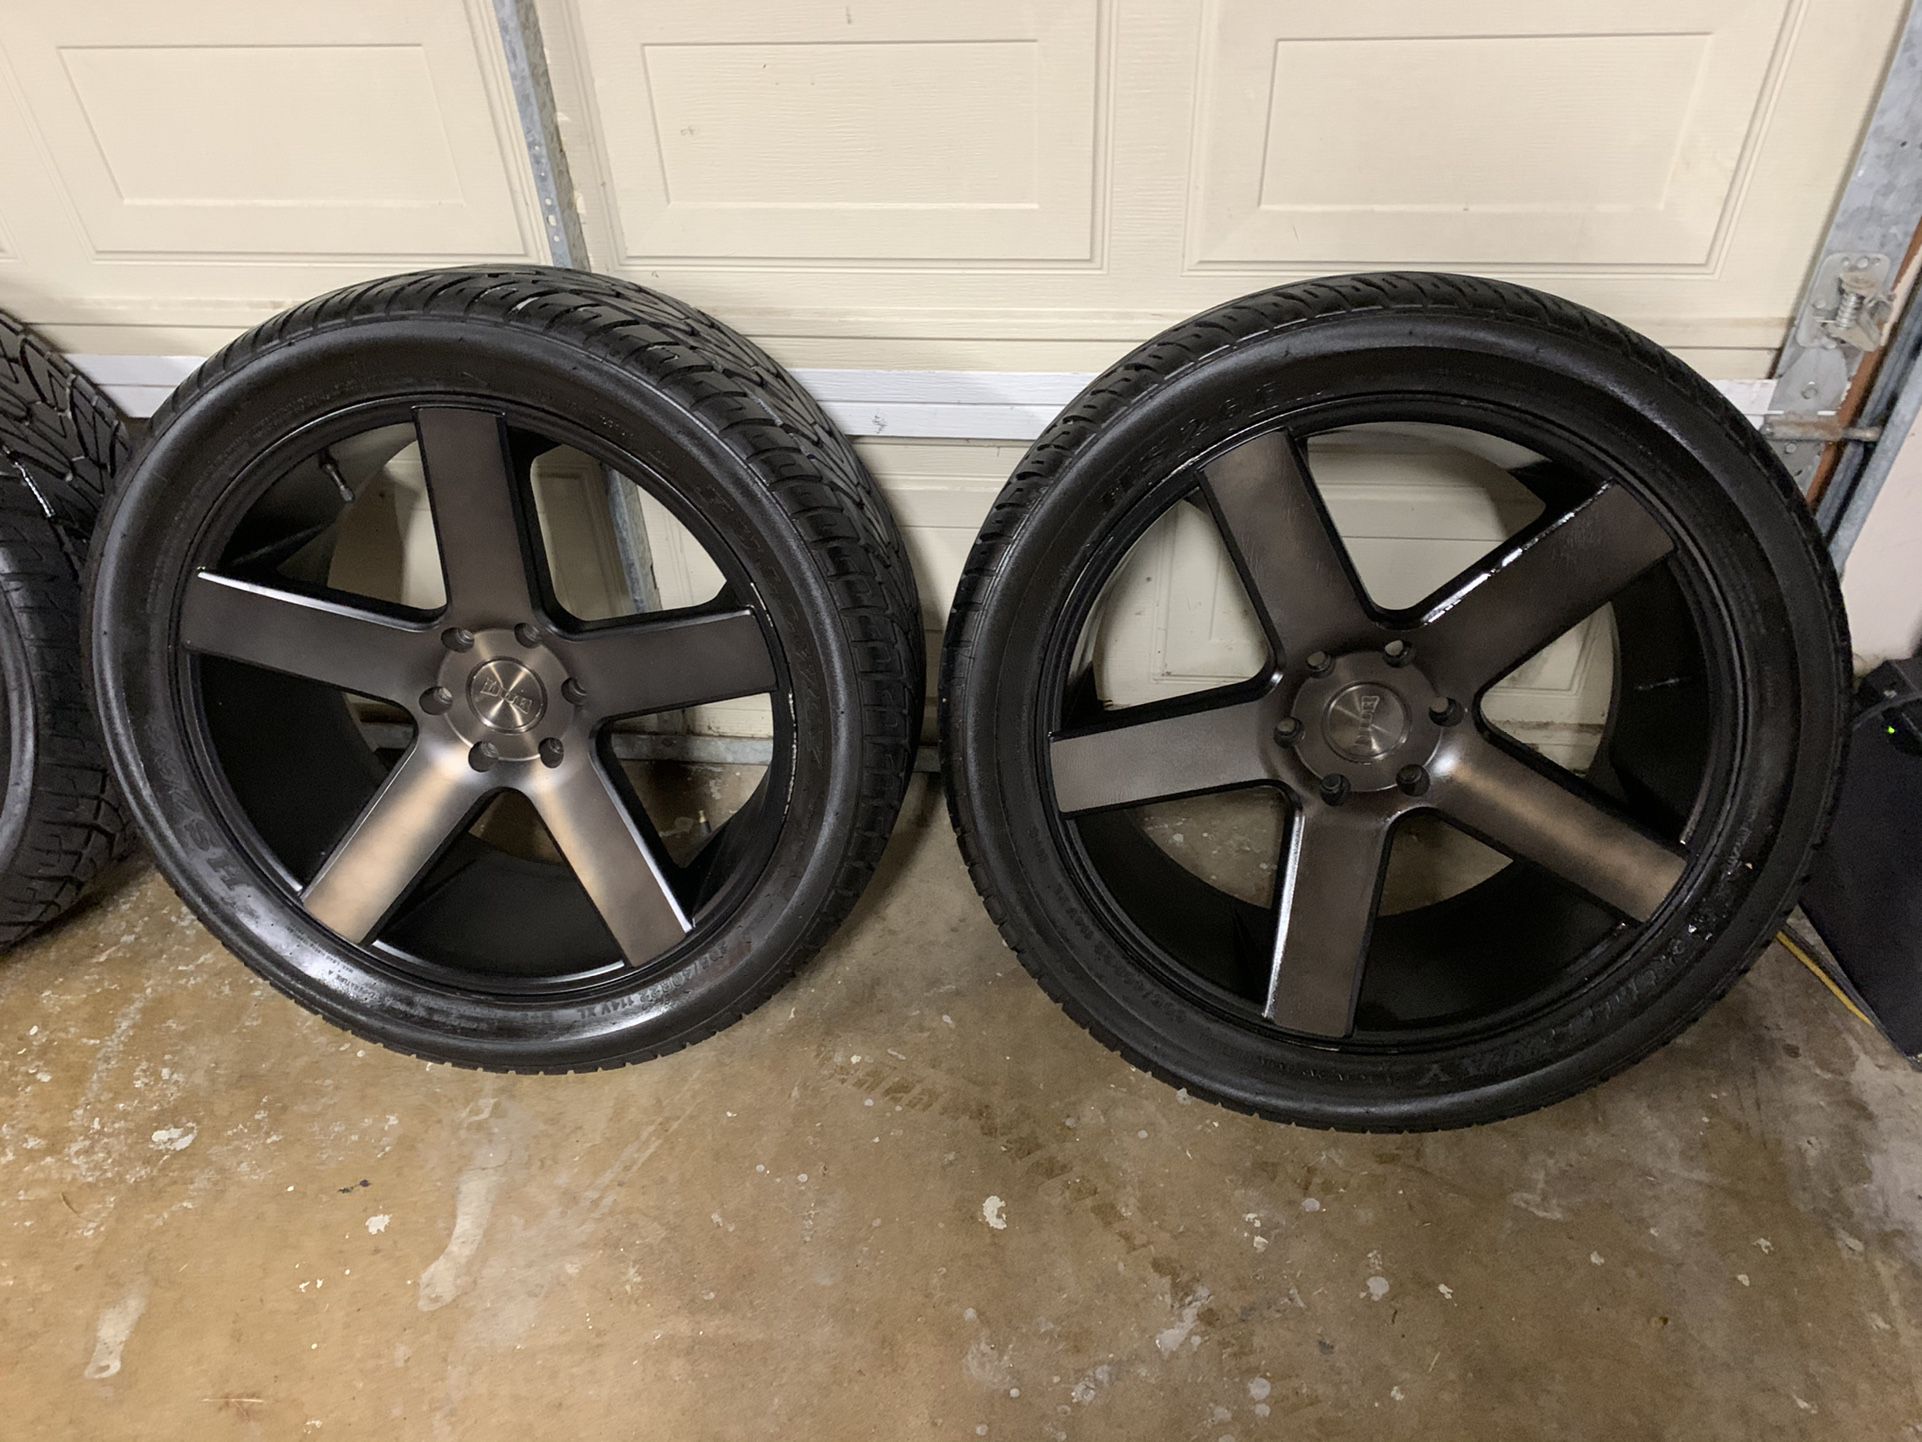 22” Dubs Black Metallic With New Tires Six Lugs For Chevy Tahoe, Sylverado, Avalanche